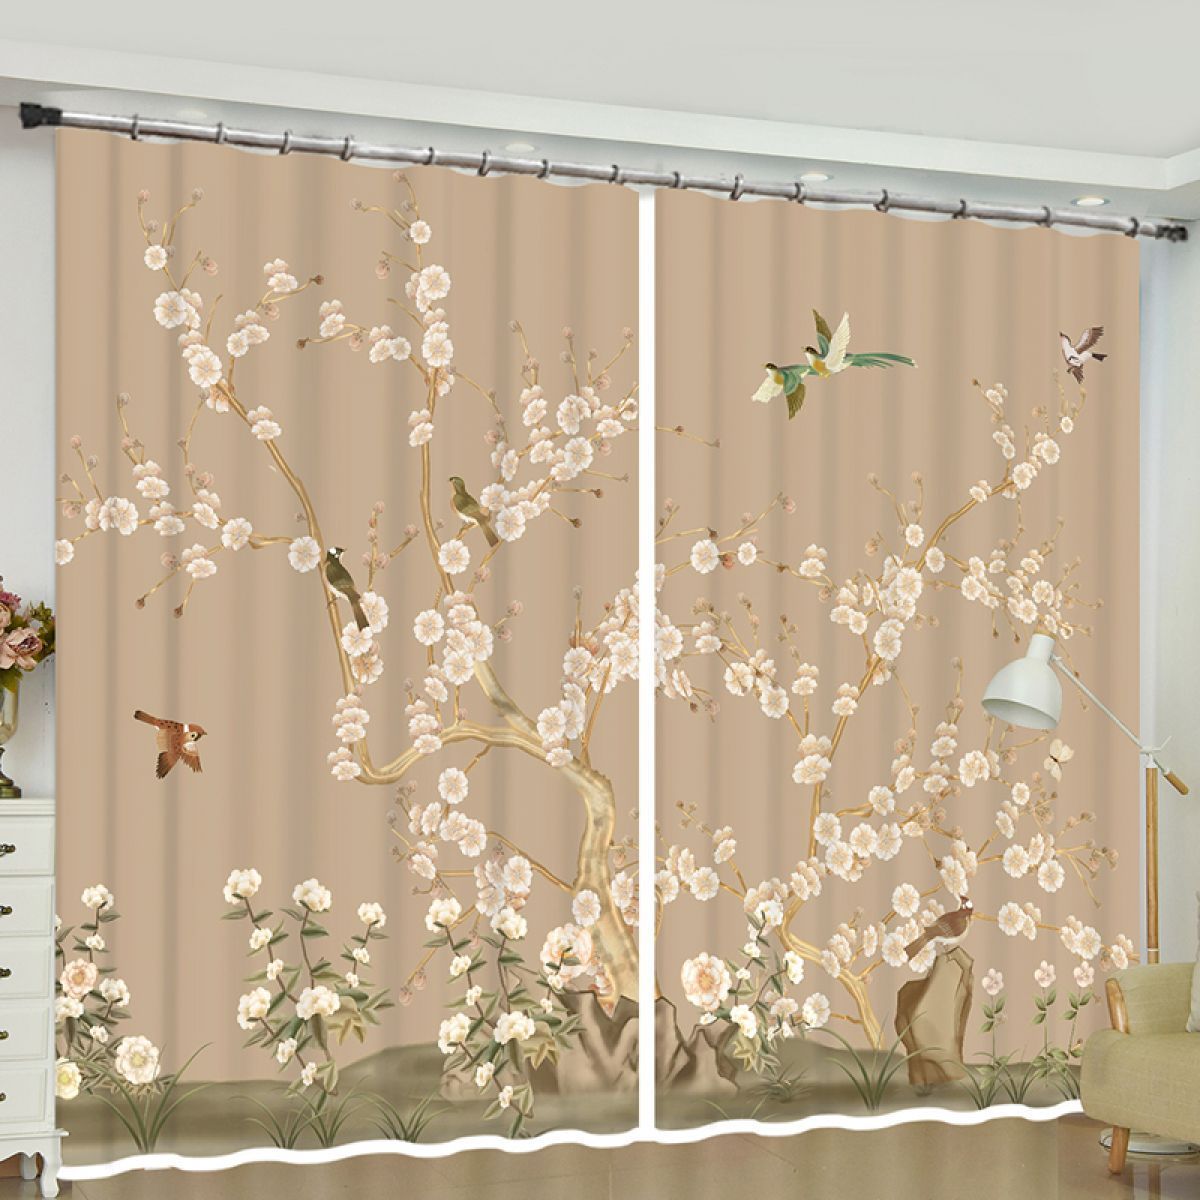 Magpies And Plum Blossom Printed Window Curtain Home Decor